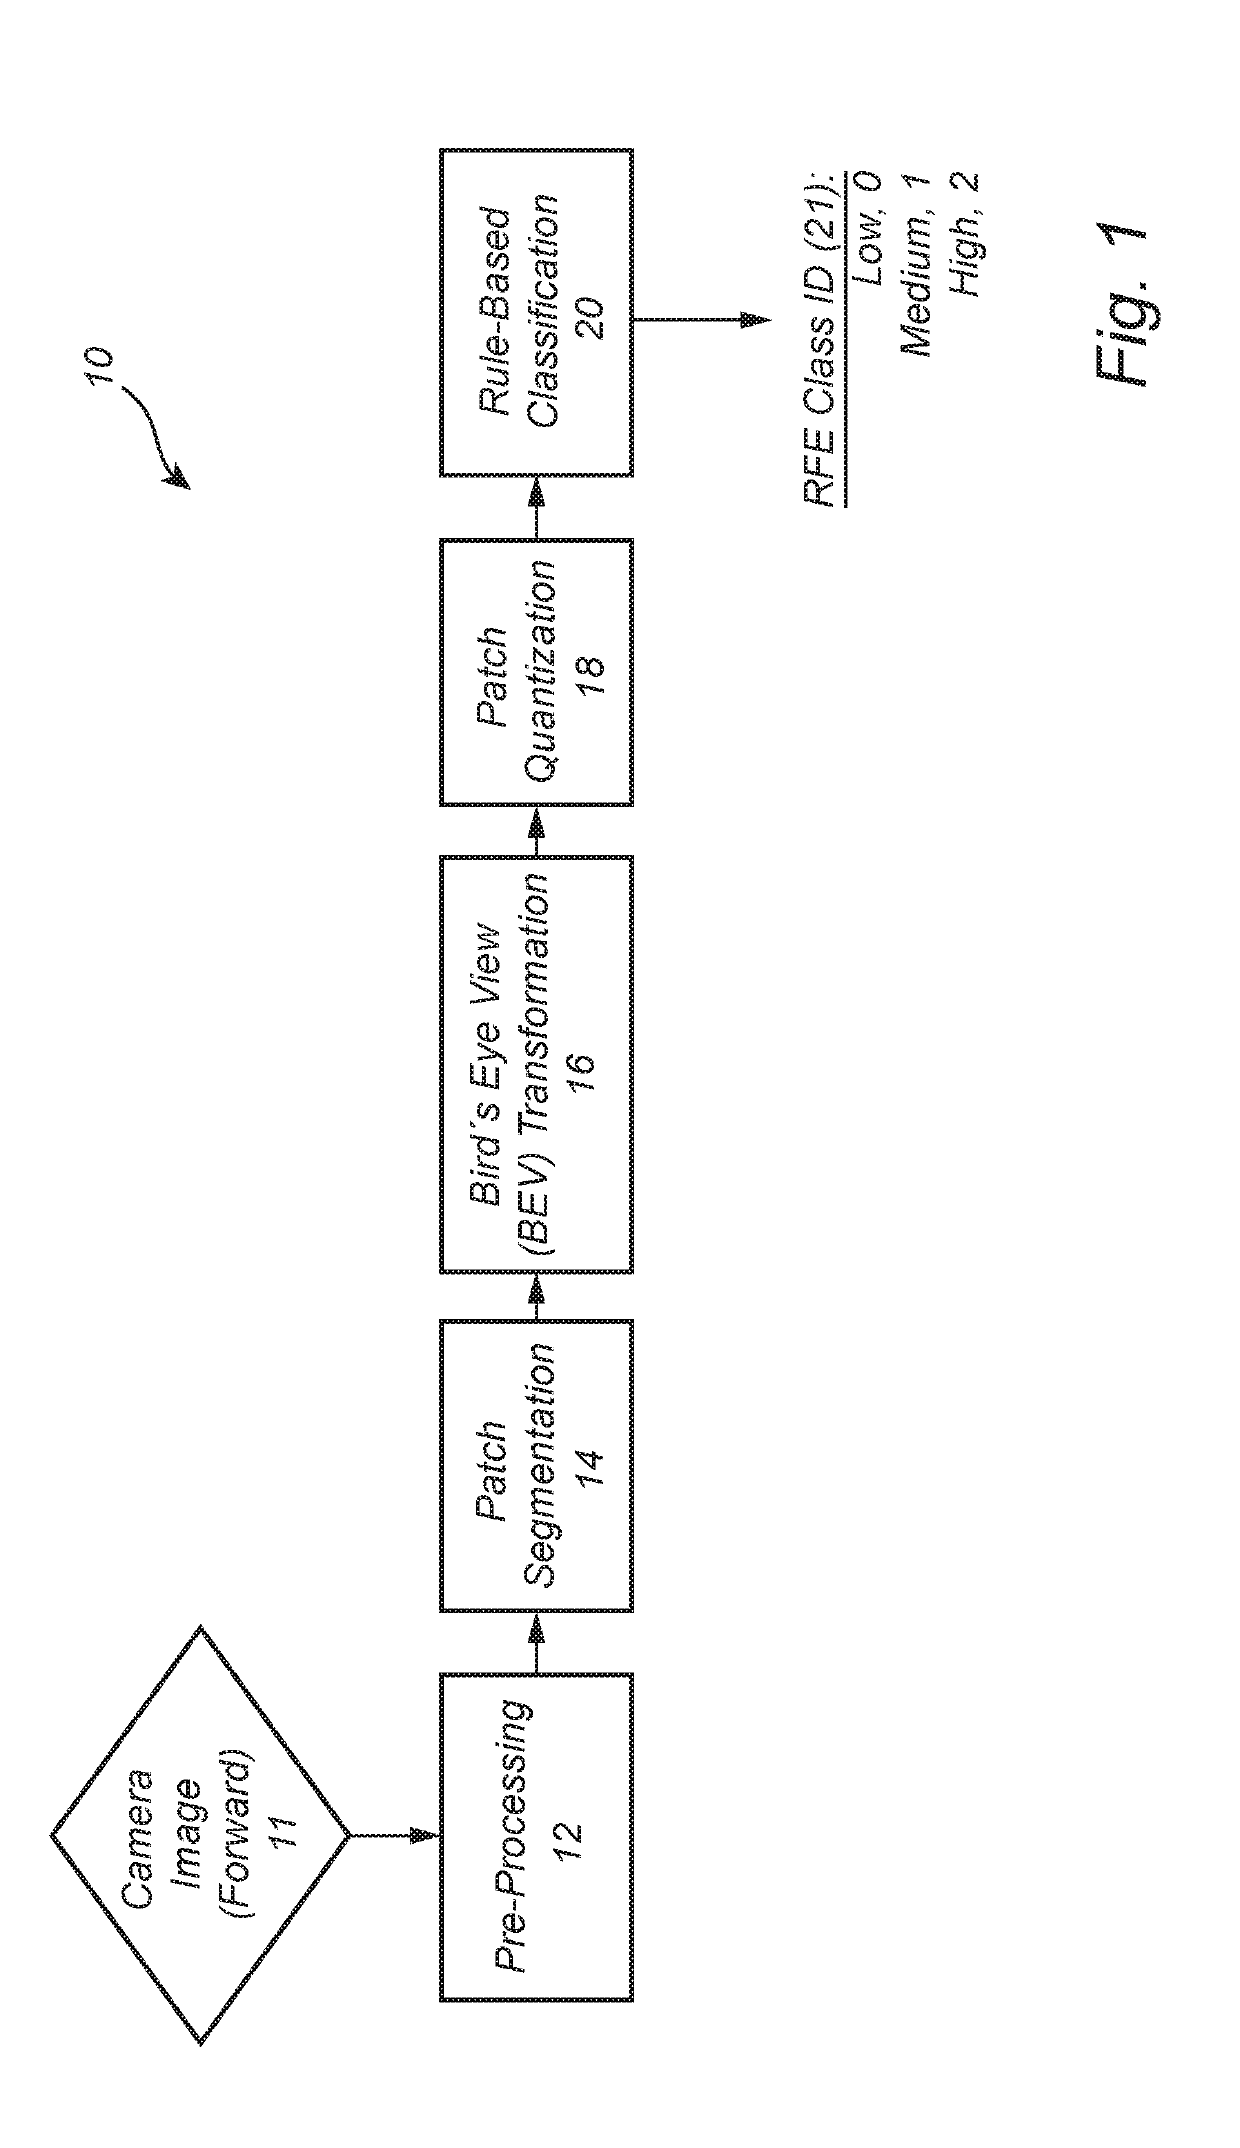 Methods and systems for generating and using a road friction estimate based on camera image signal processing